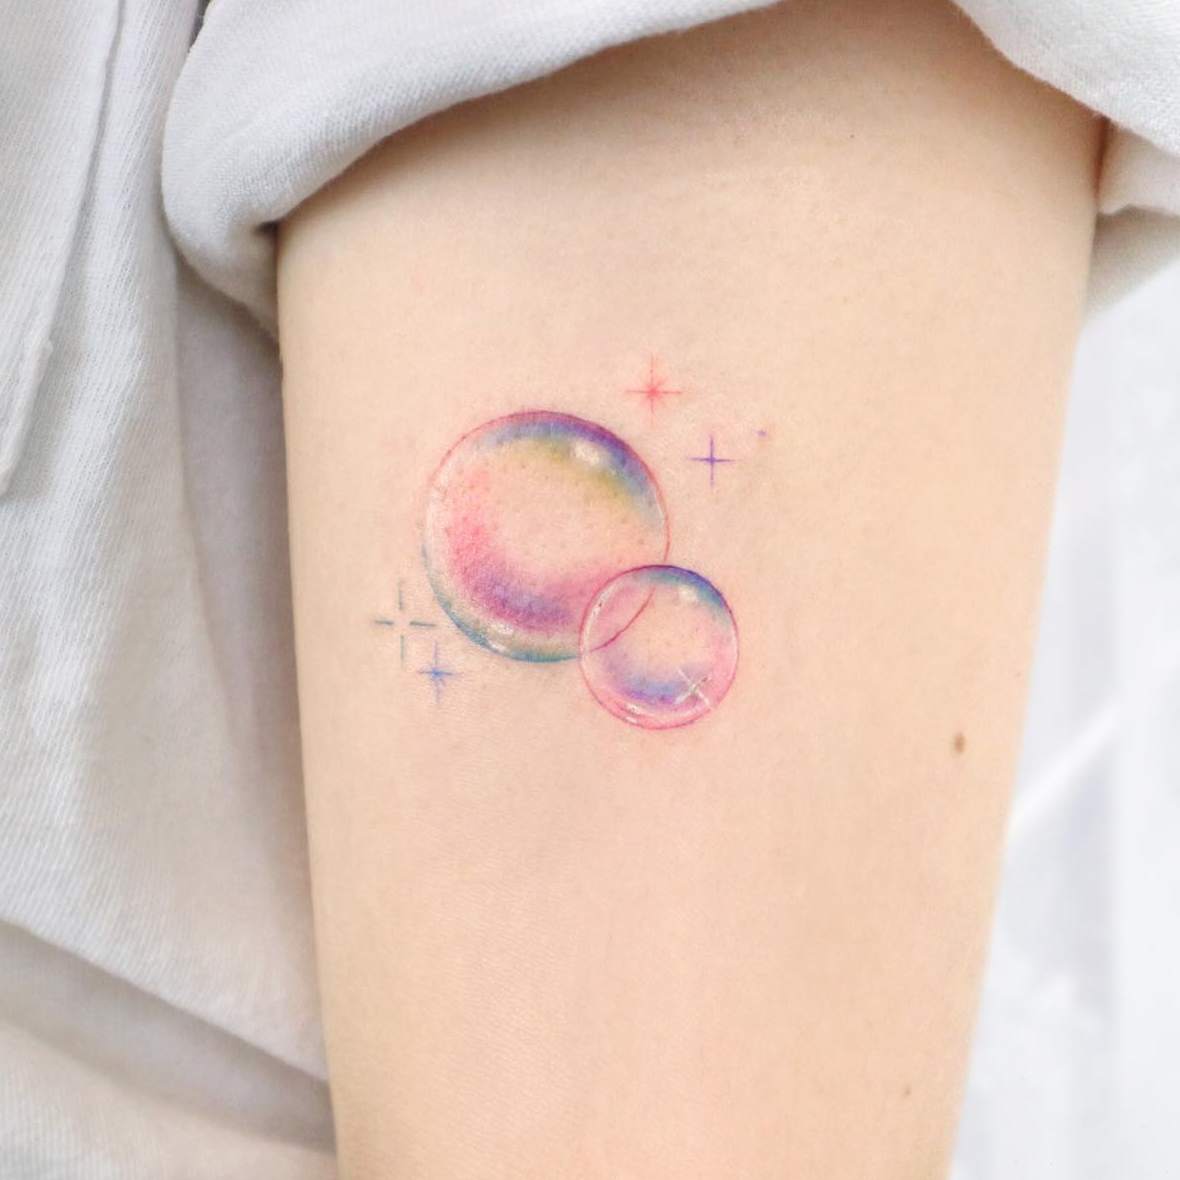 Bubble tattoo meaning